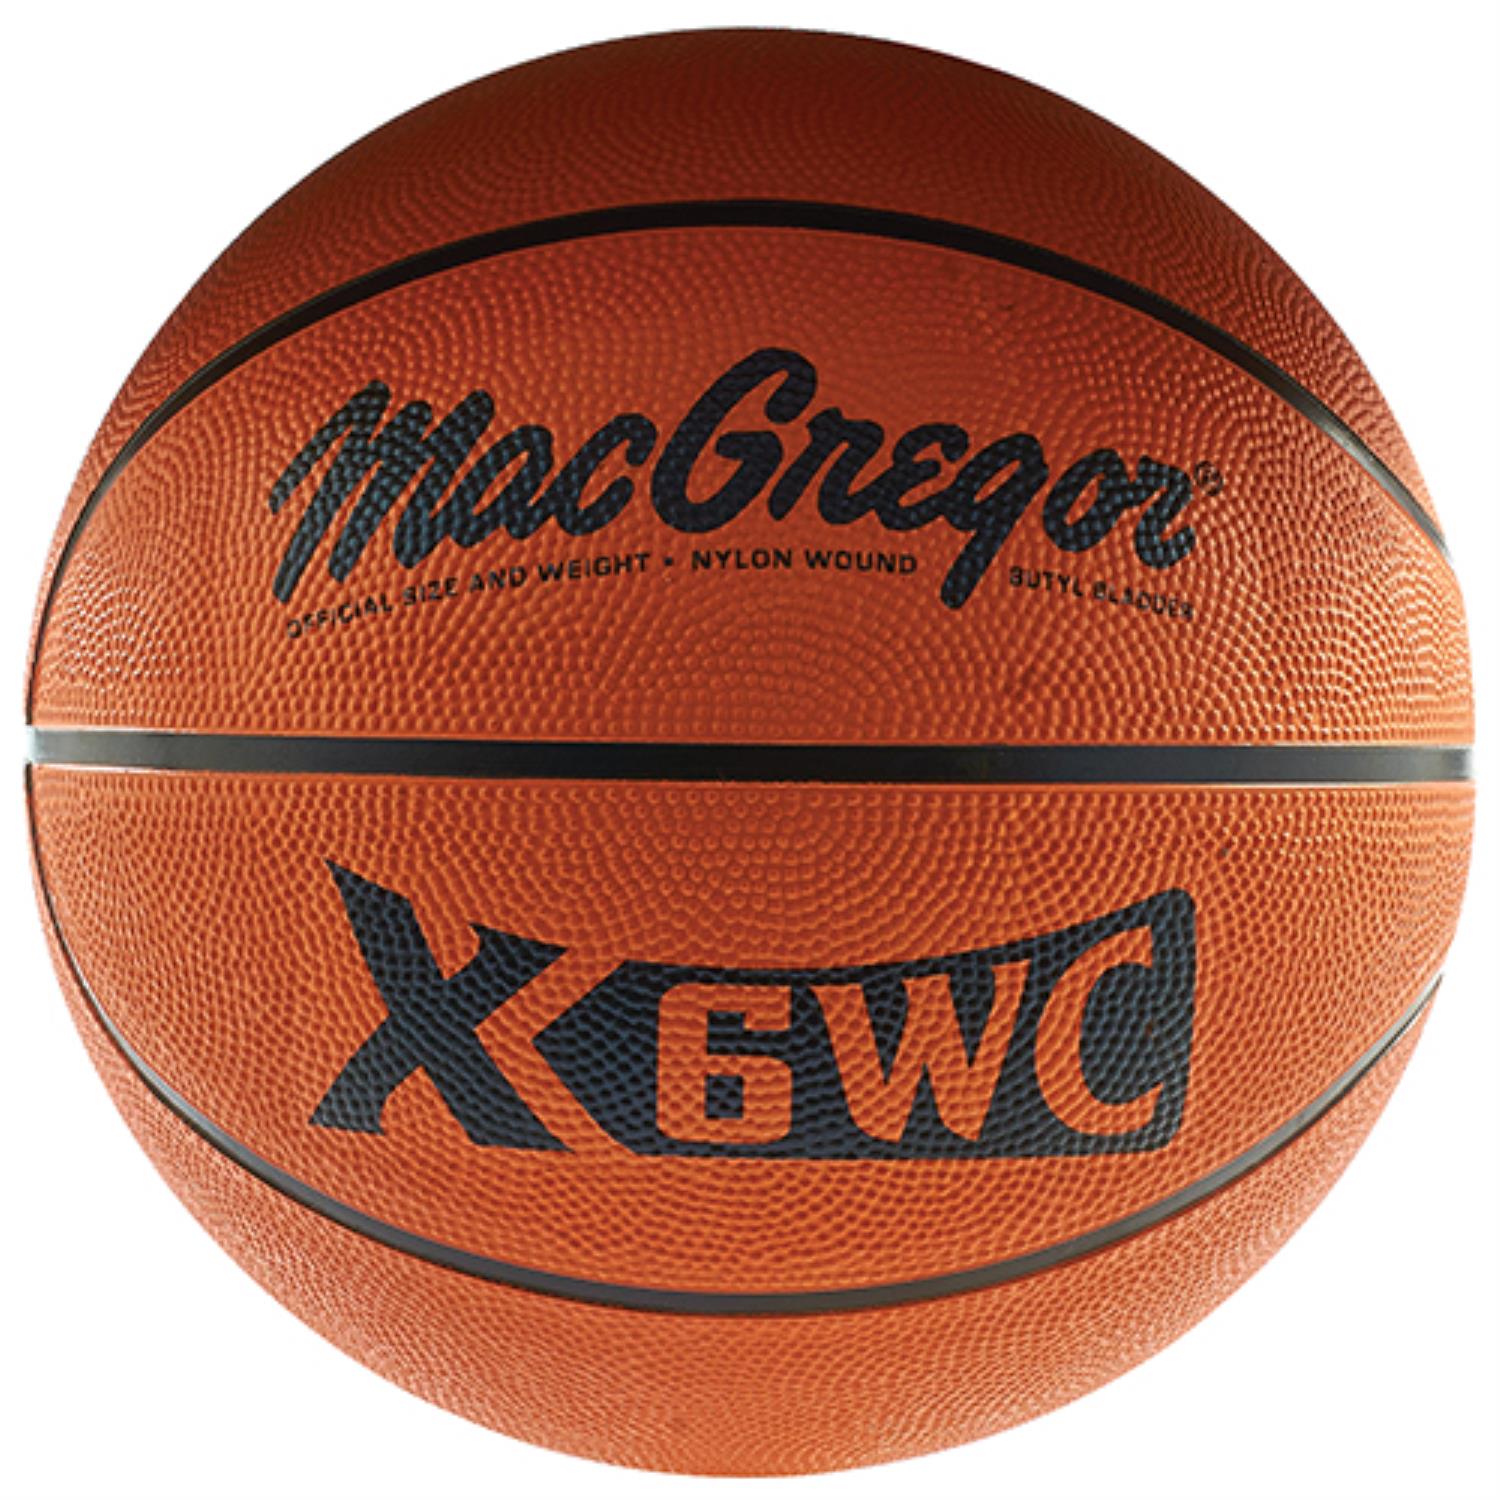 Athletic Connection Macgregor Rubber Basketball MCX35WID